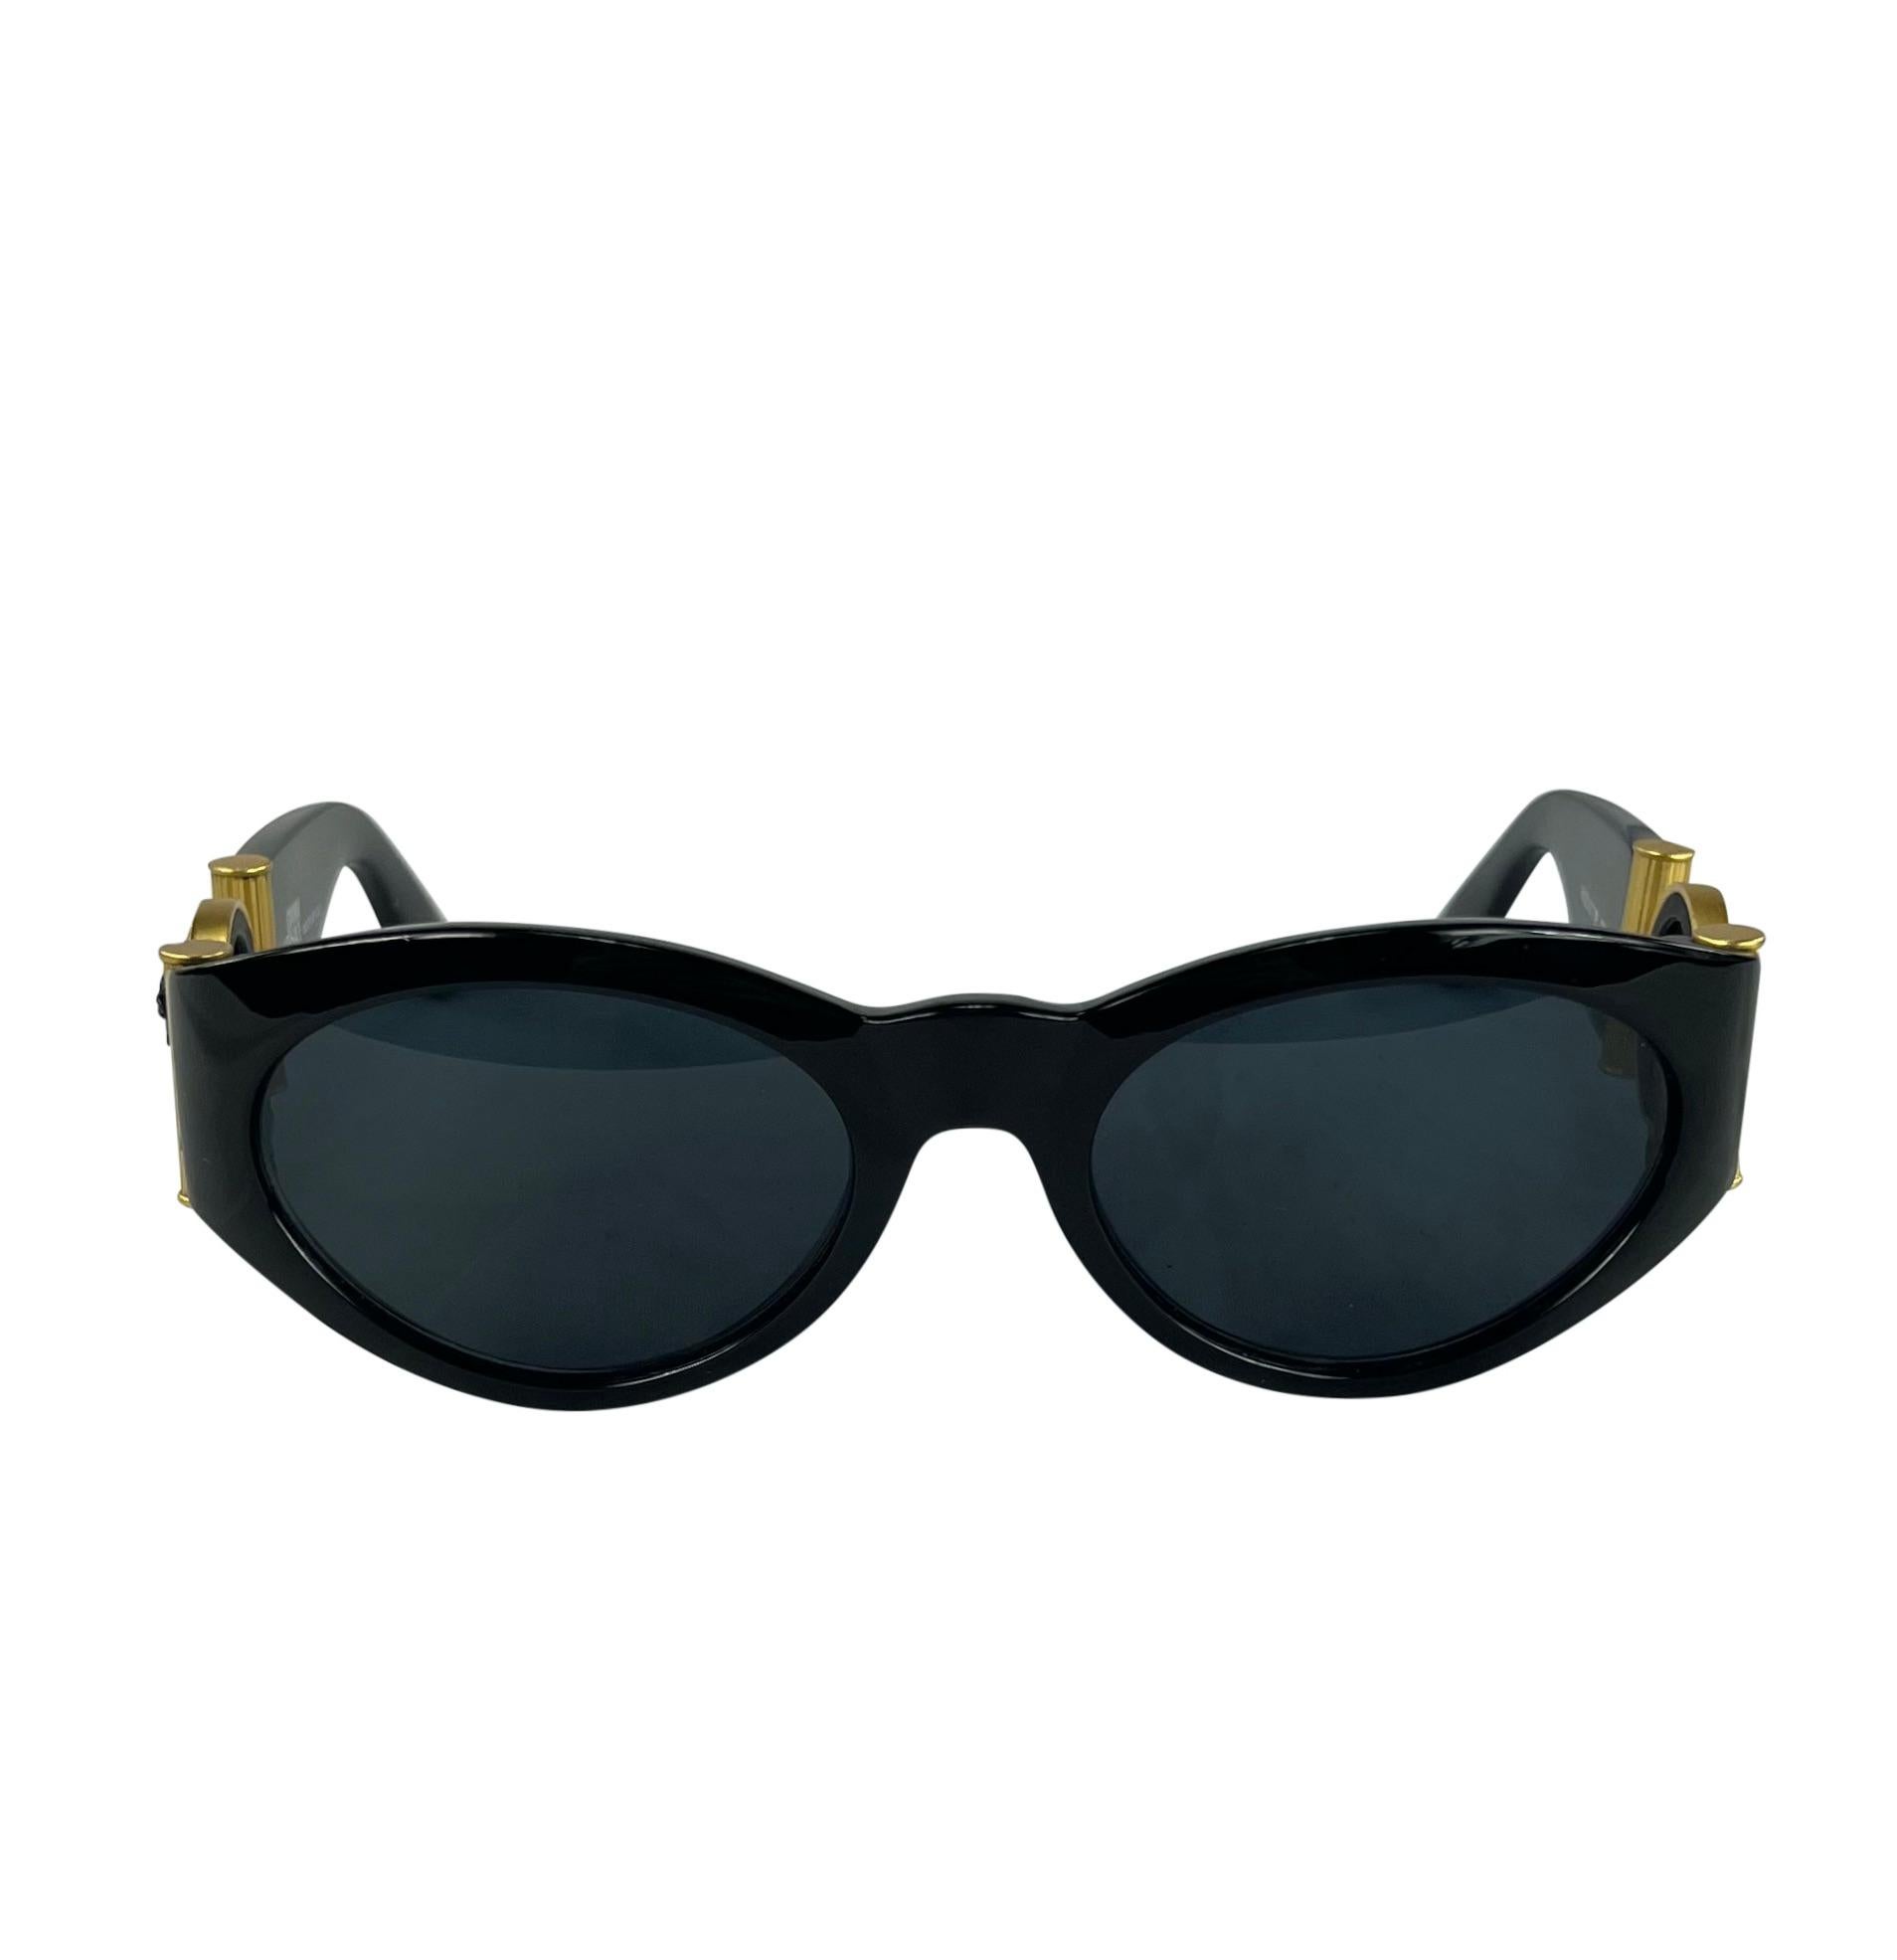 Designed by Gianni Versace in the 1990s, these black oval sunglasses are an ultra-chic addition to any wardrobe. Their sleek shape is accentuated by iconic gold-tone Versace Medusa reliefs adorning each arm. 

Approximate measurements:
Frame height: